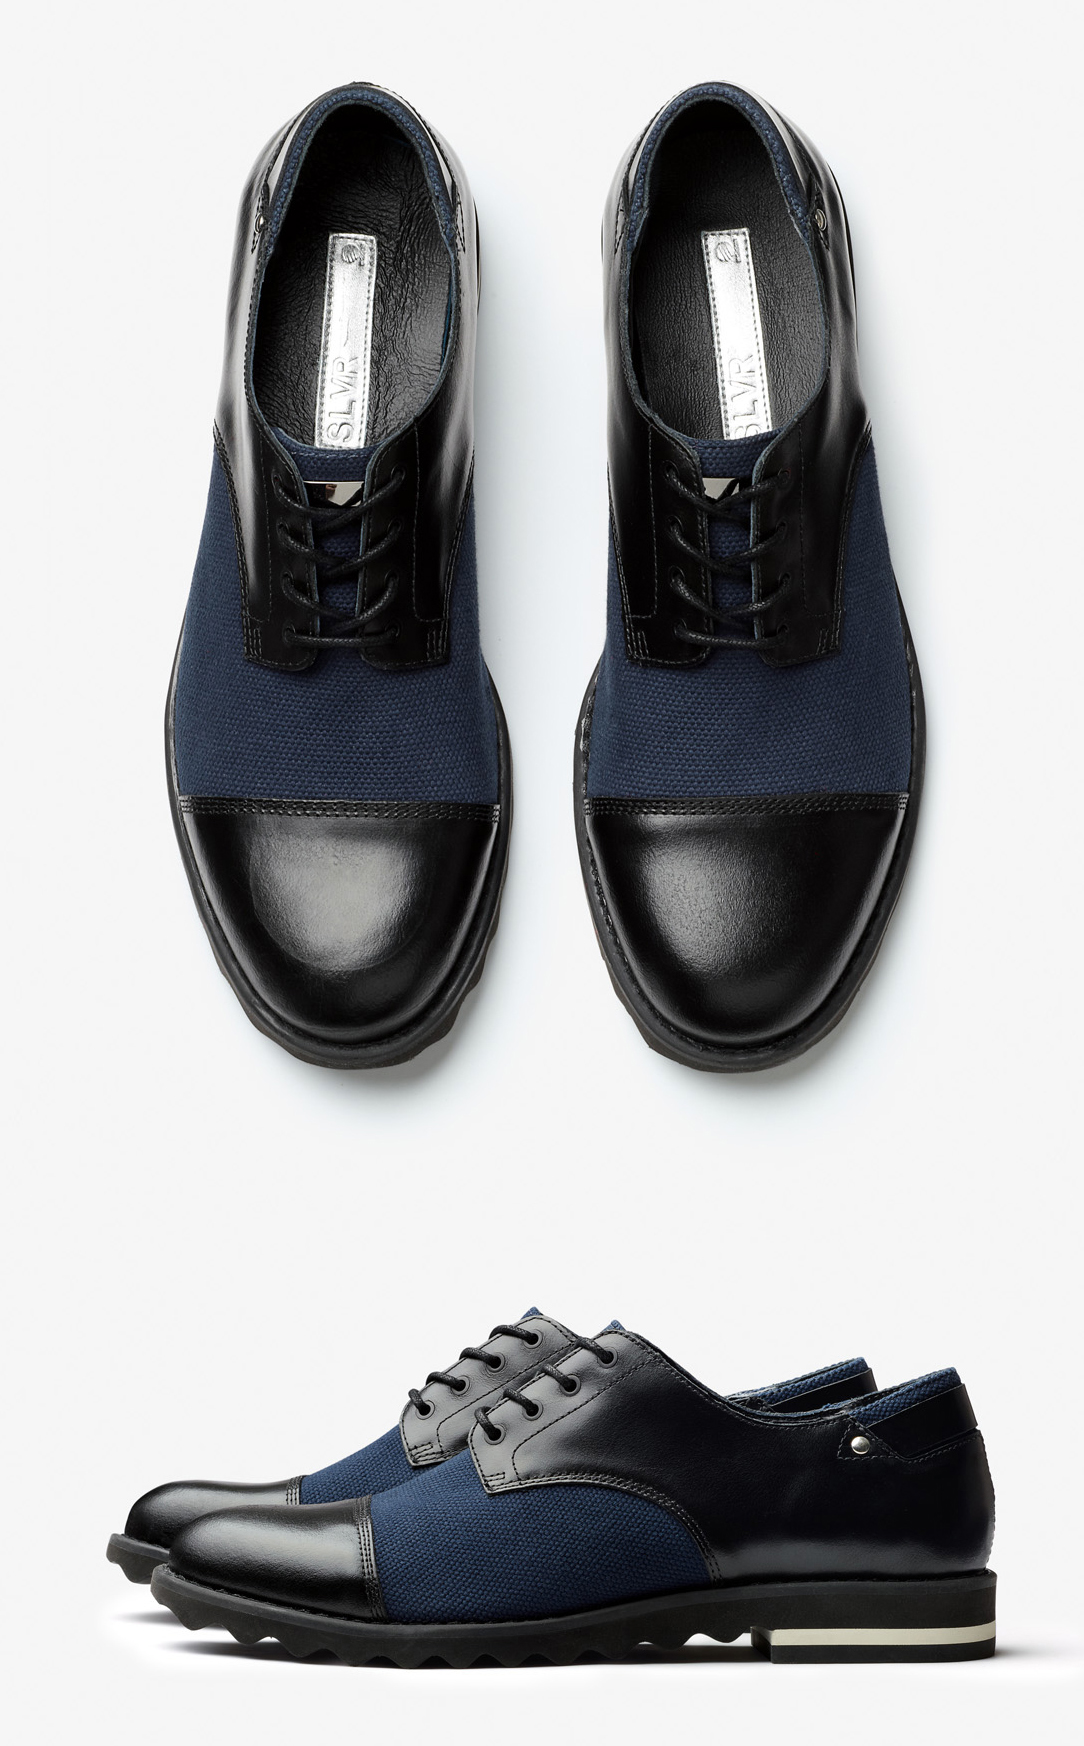 High end cap toe shoes from adidas collection | SOLETOPIA